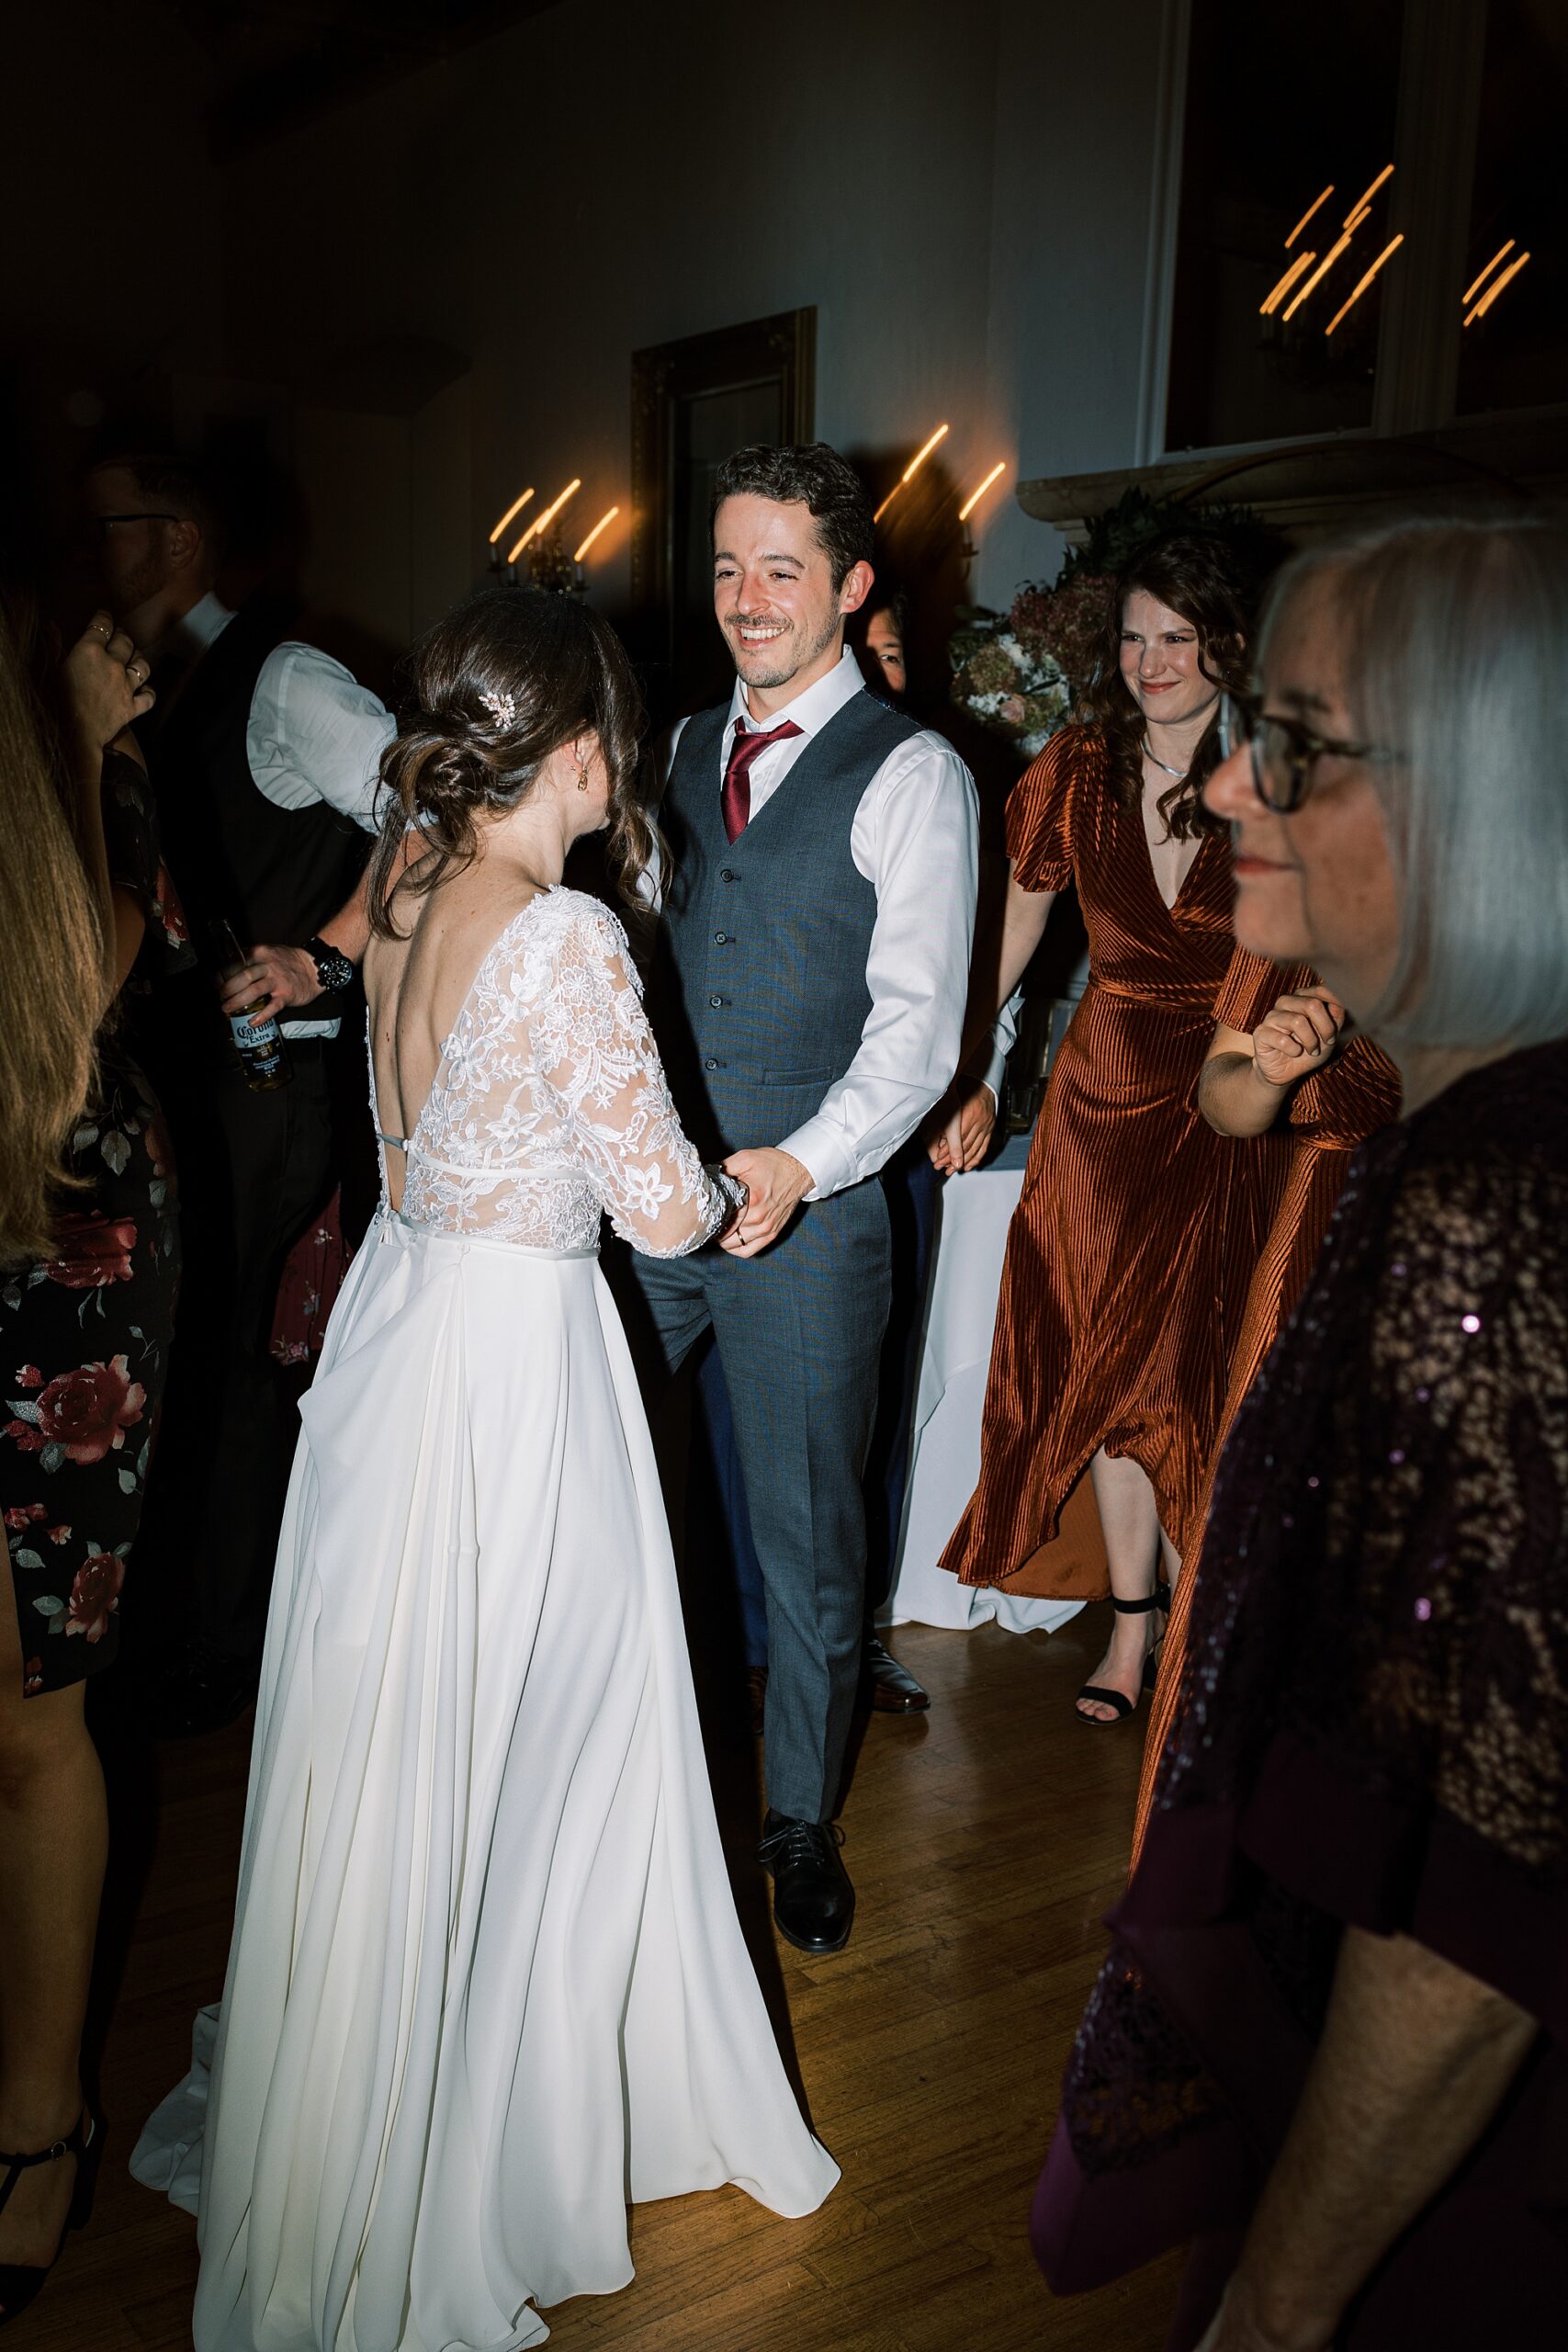 bride and groom dance with wedding guests during PA wedding reception